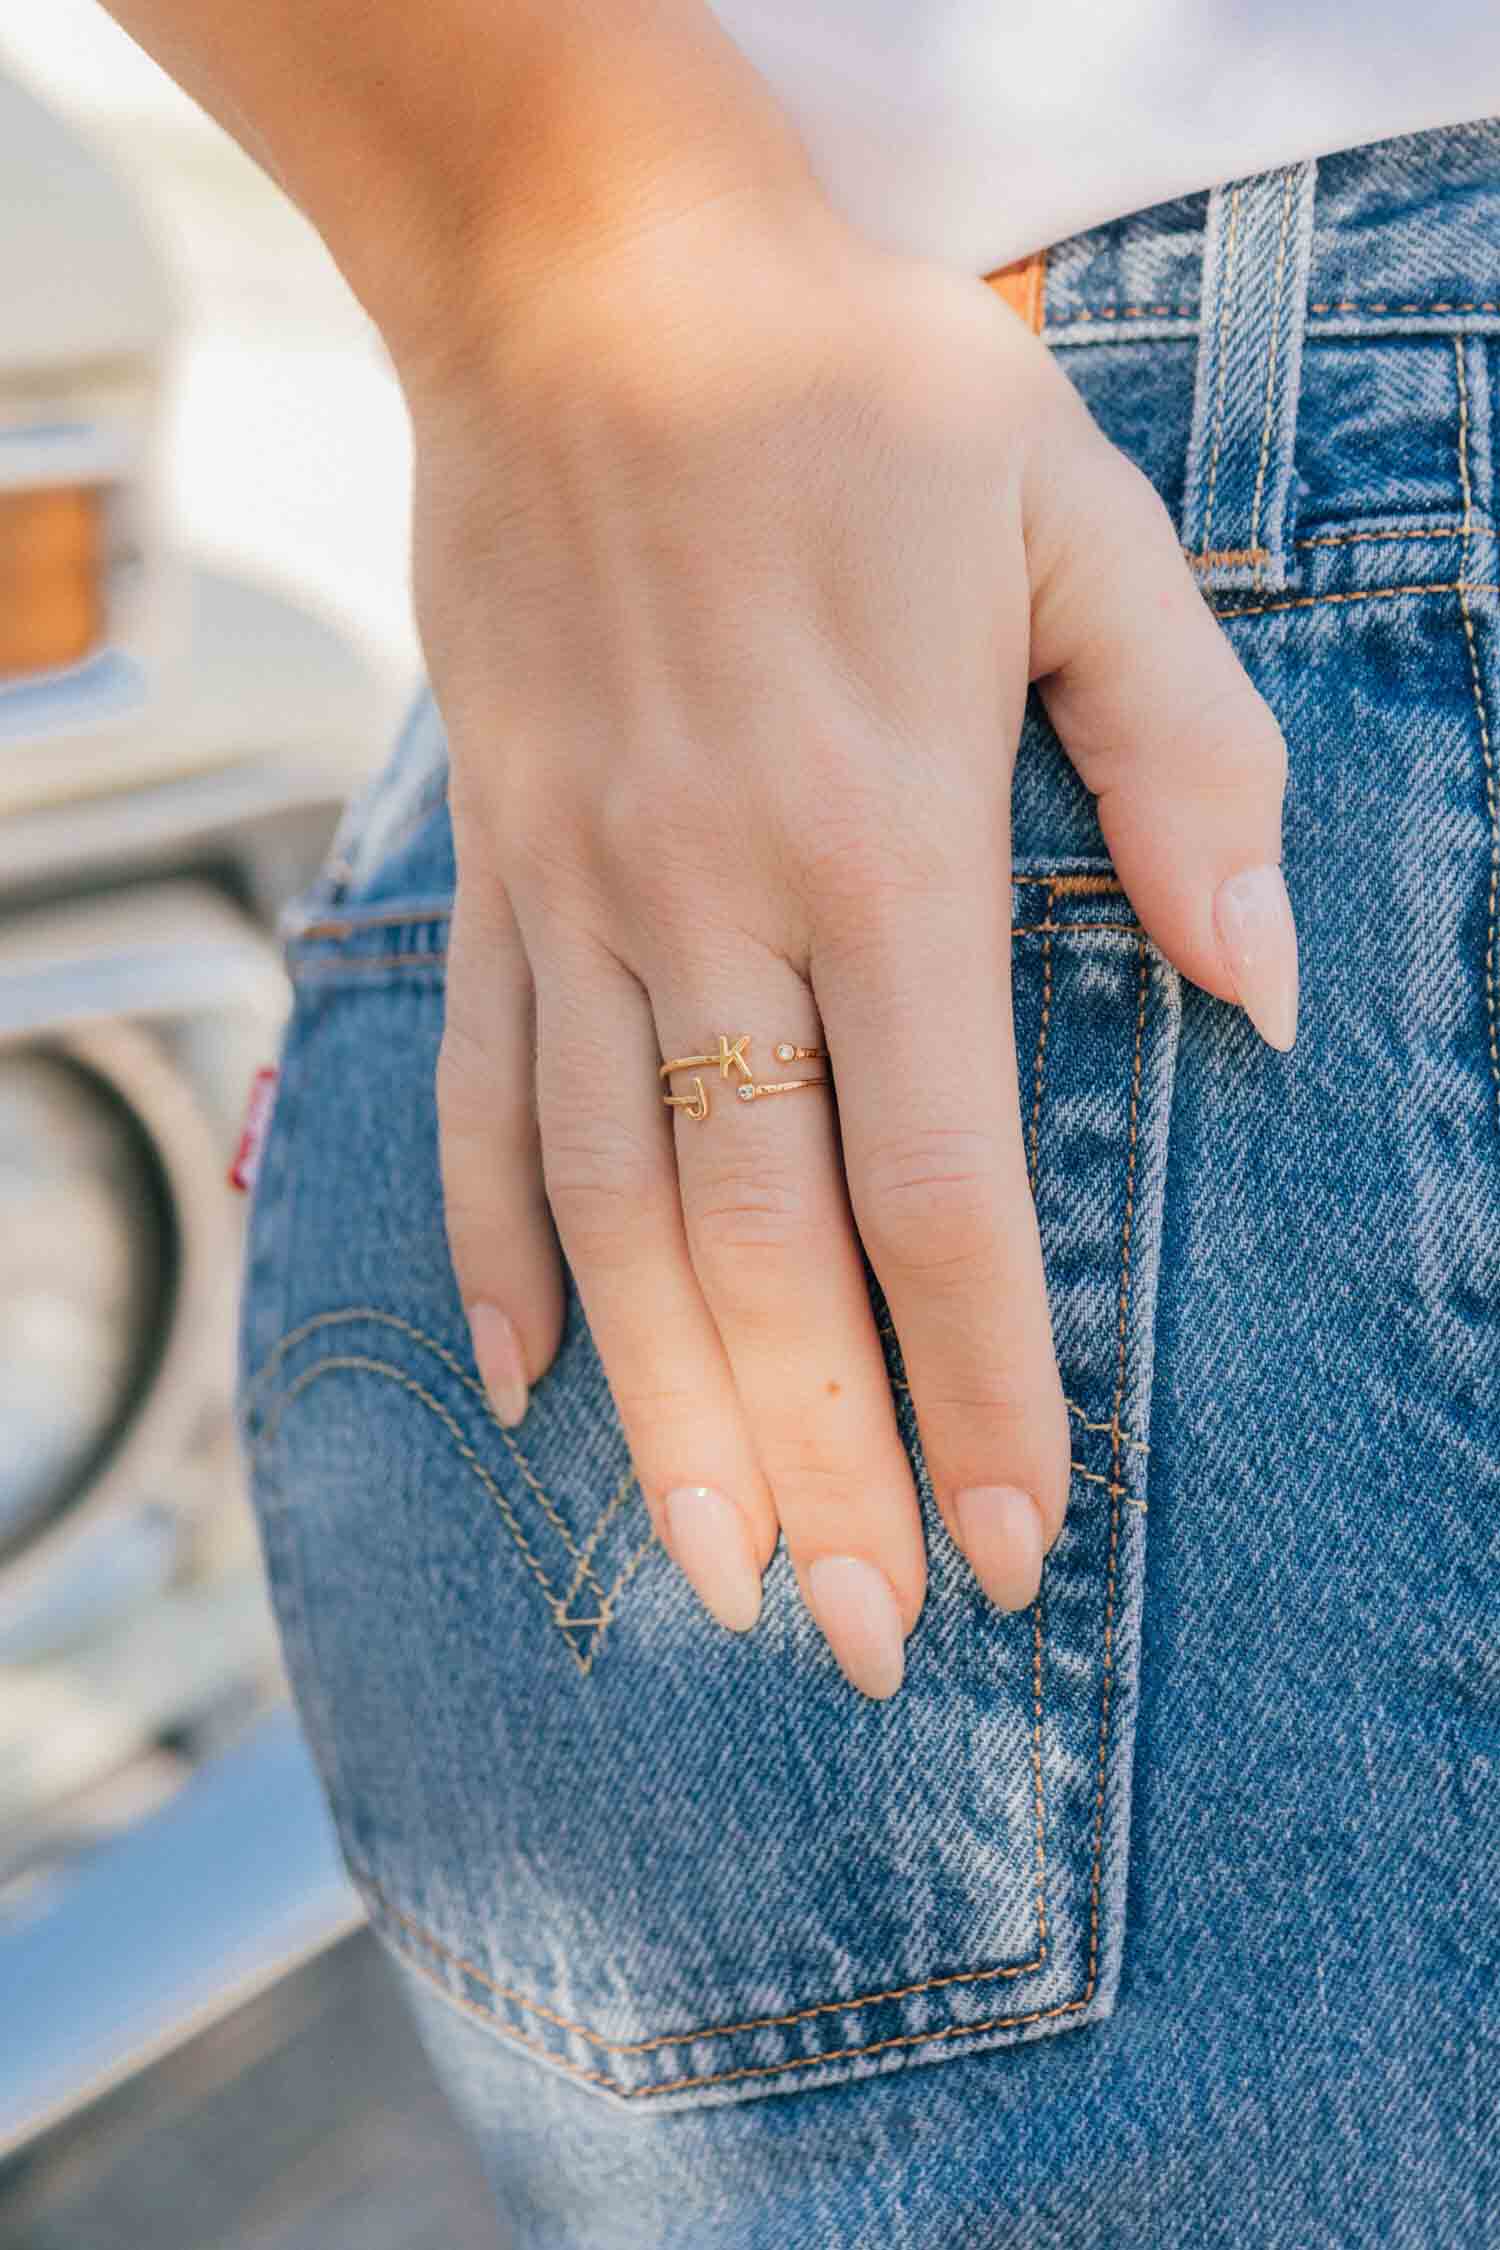 Woman's hand on jeans wearing Katie Dean Jewelry Initial Ring